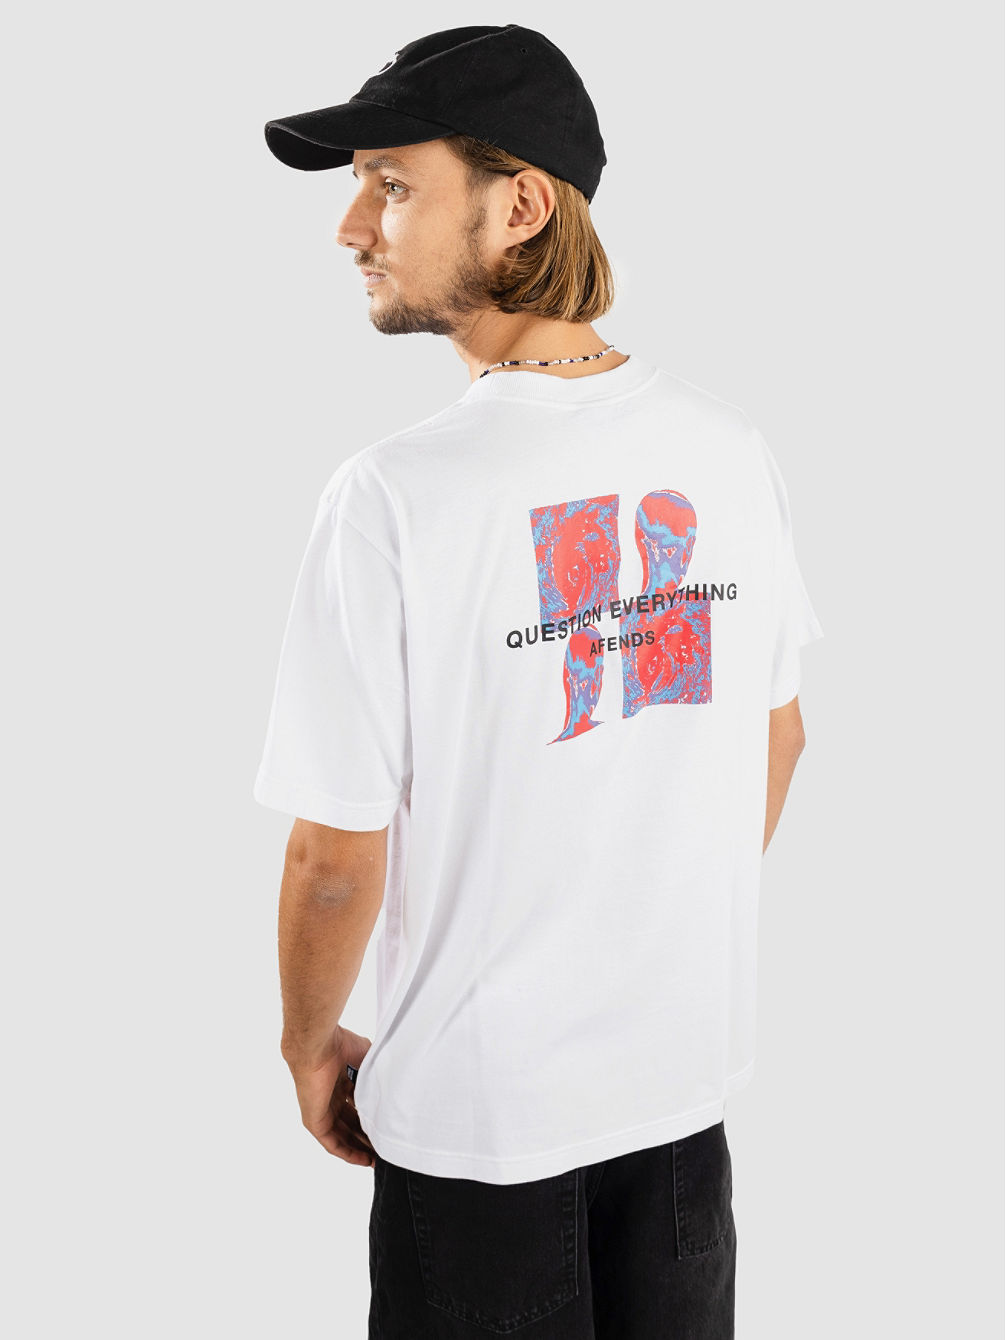 Worldstar Recycled Retro Fit T-shirt